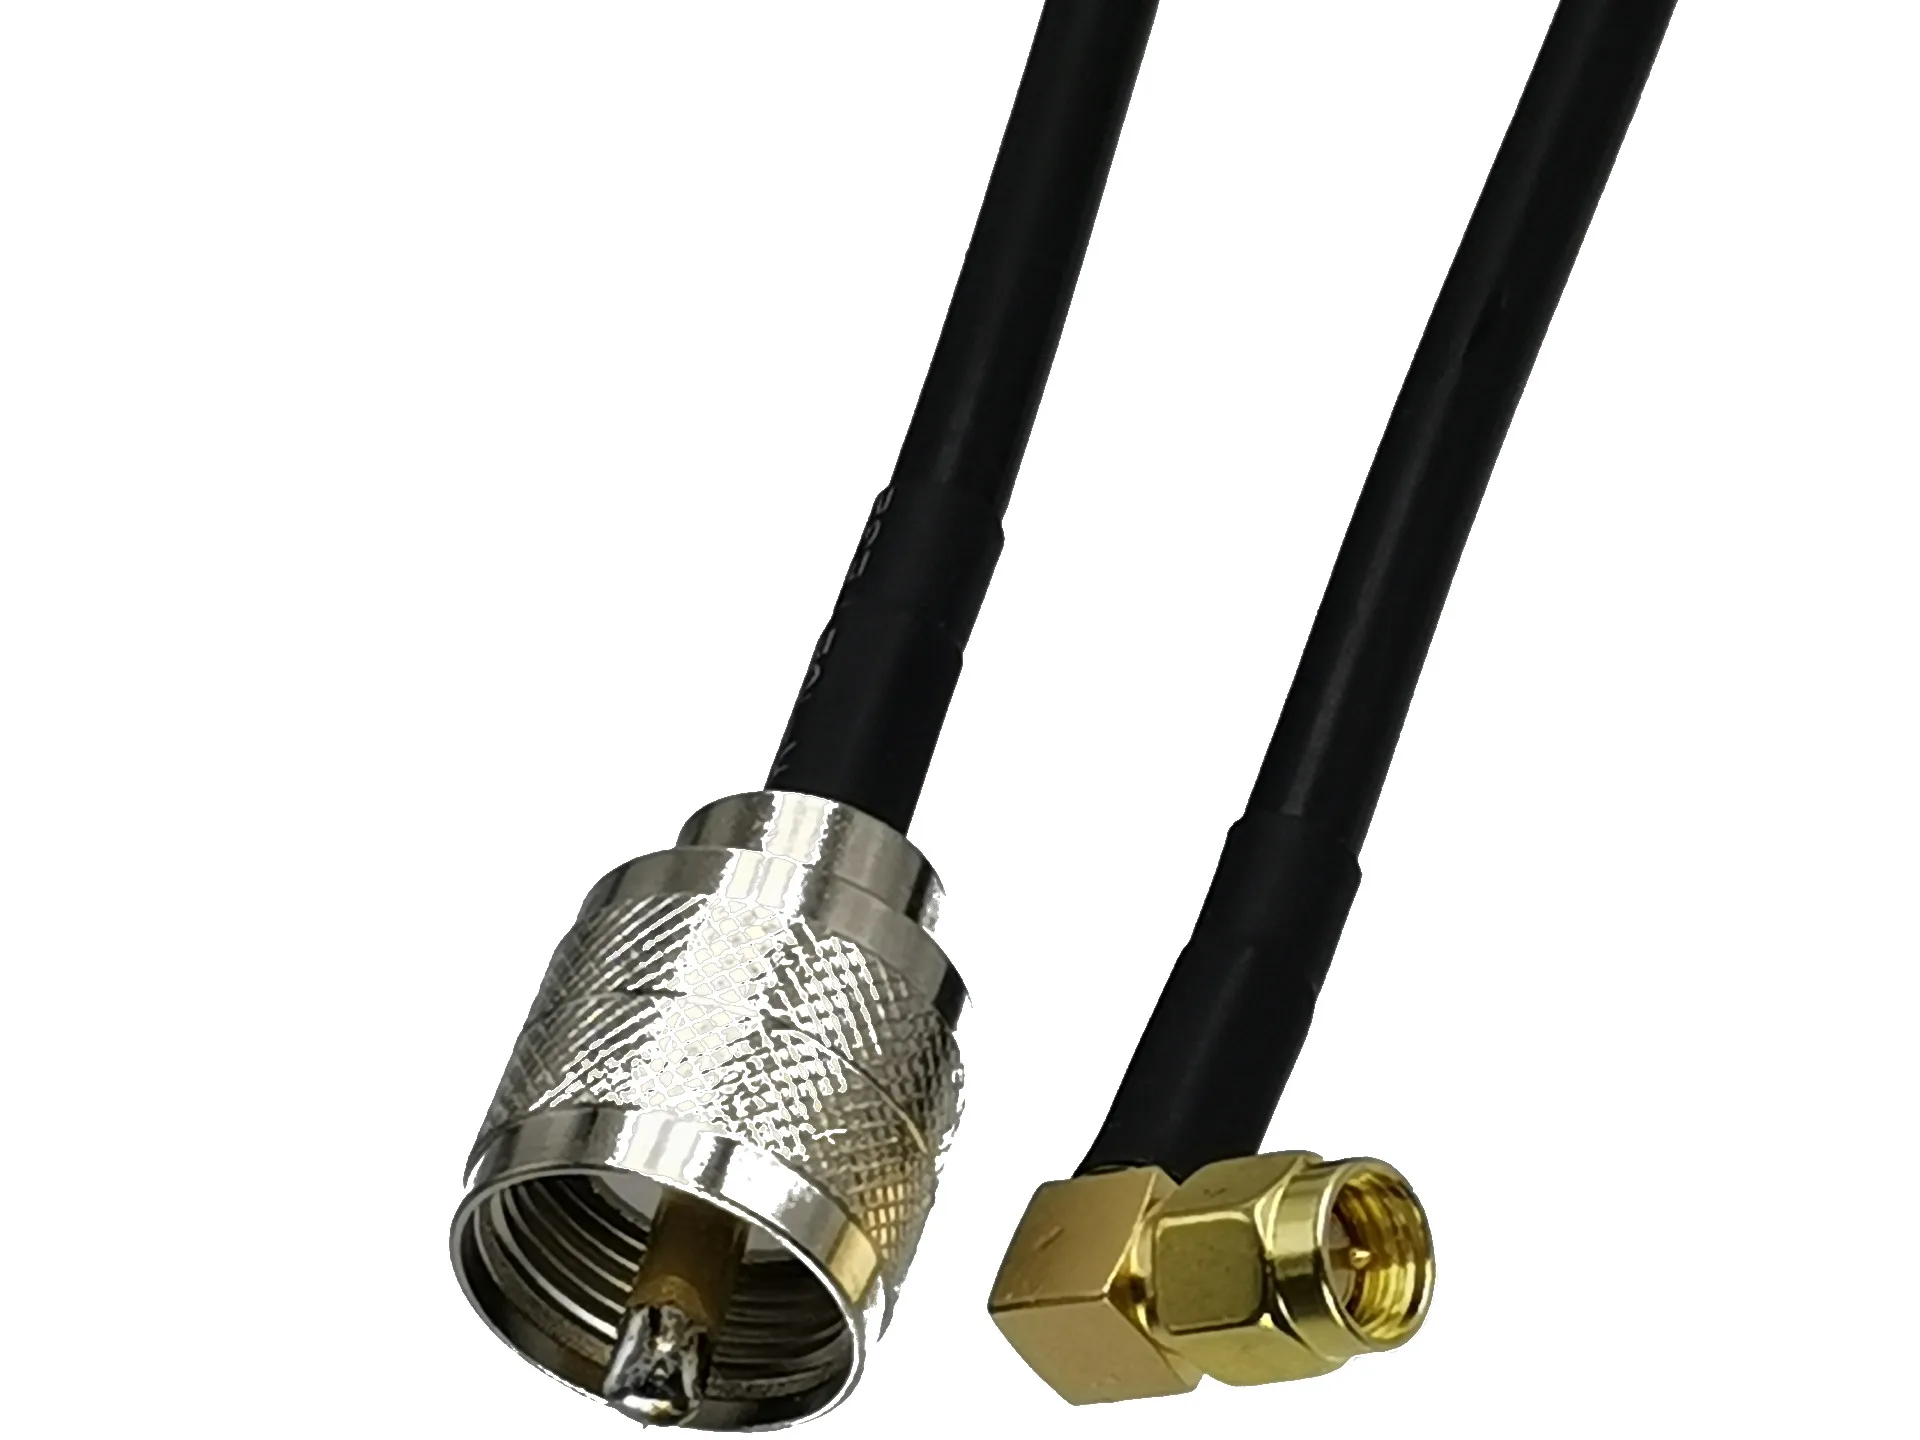 

1pcs RG58 SMA Male Plug Right Angle to UHF PL259 Male Plug RF Coaxial Connector Pigtail Jumper Cable New 6inch~5M